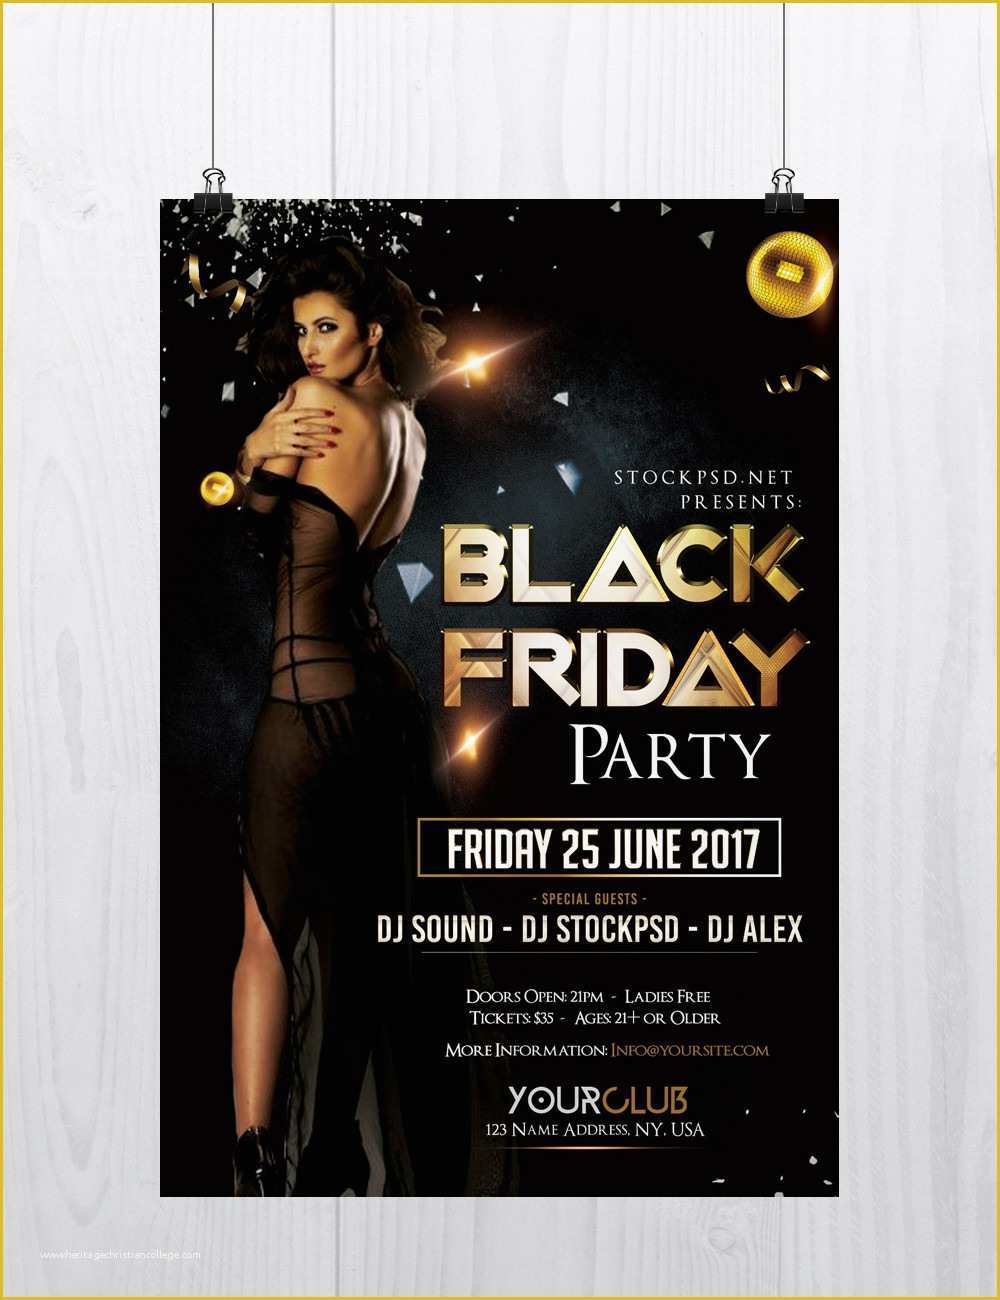 Free Party Flyer Templates Of 98 Premium & Free Flyer Templates Psd Absolutely Free to